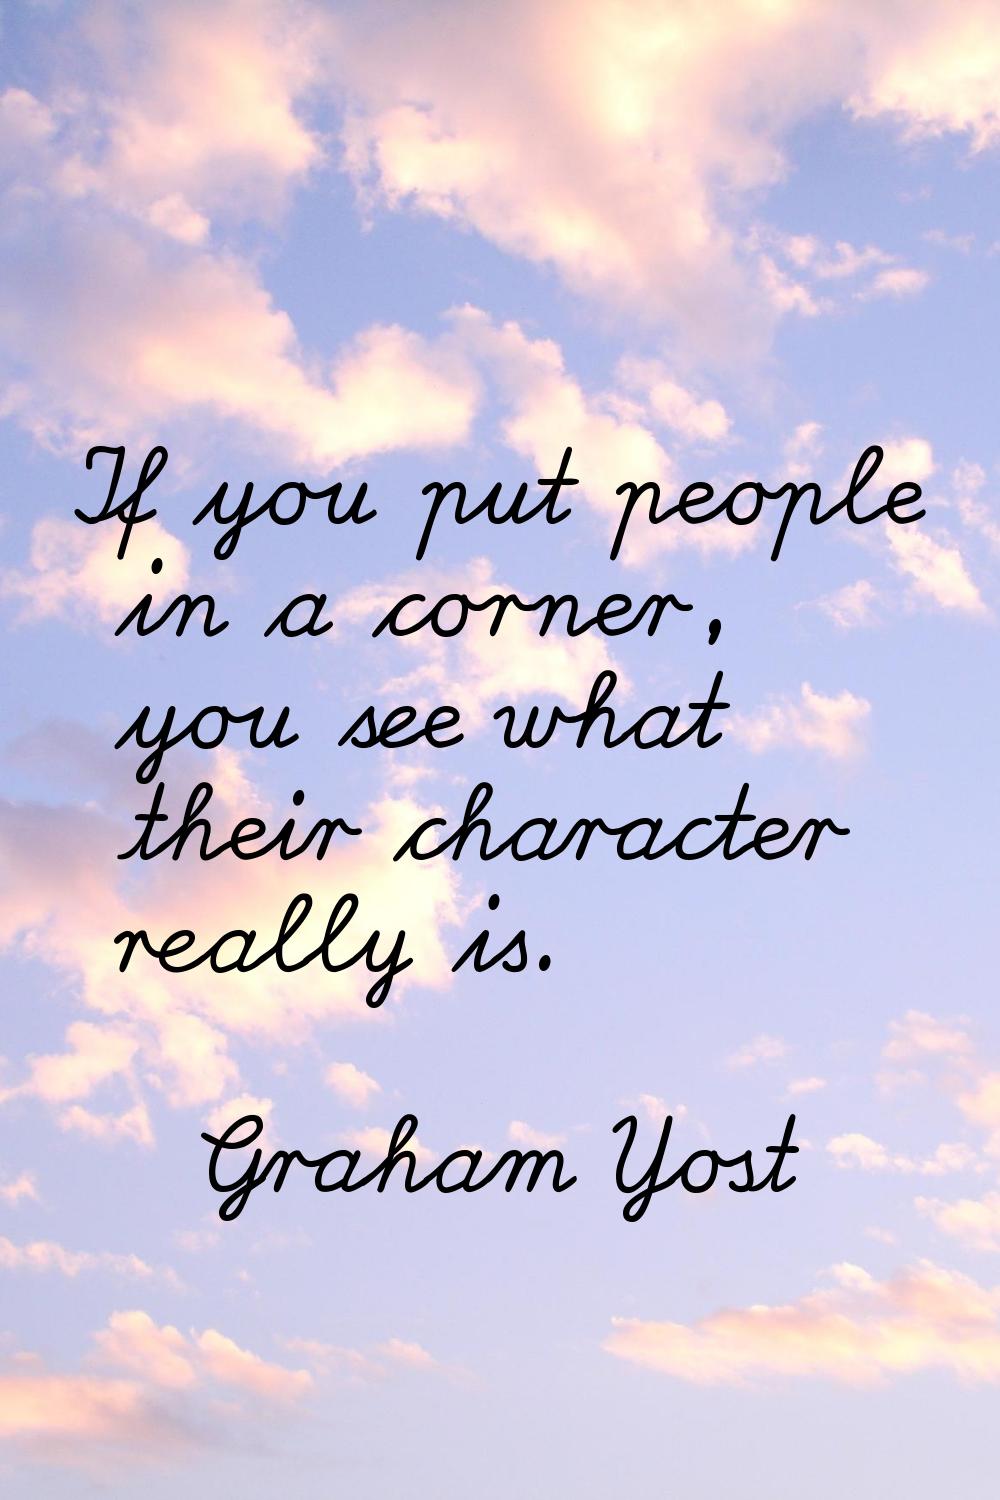 If you put people in a corner, you see what their character really is.